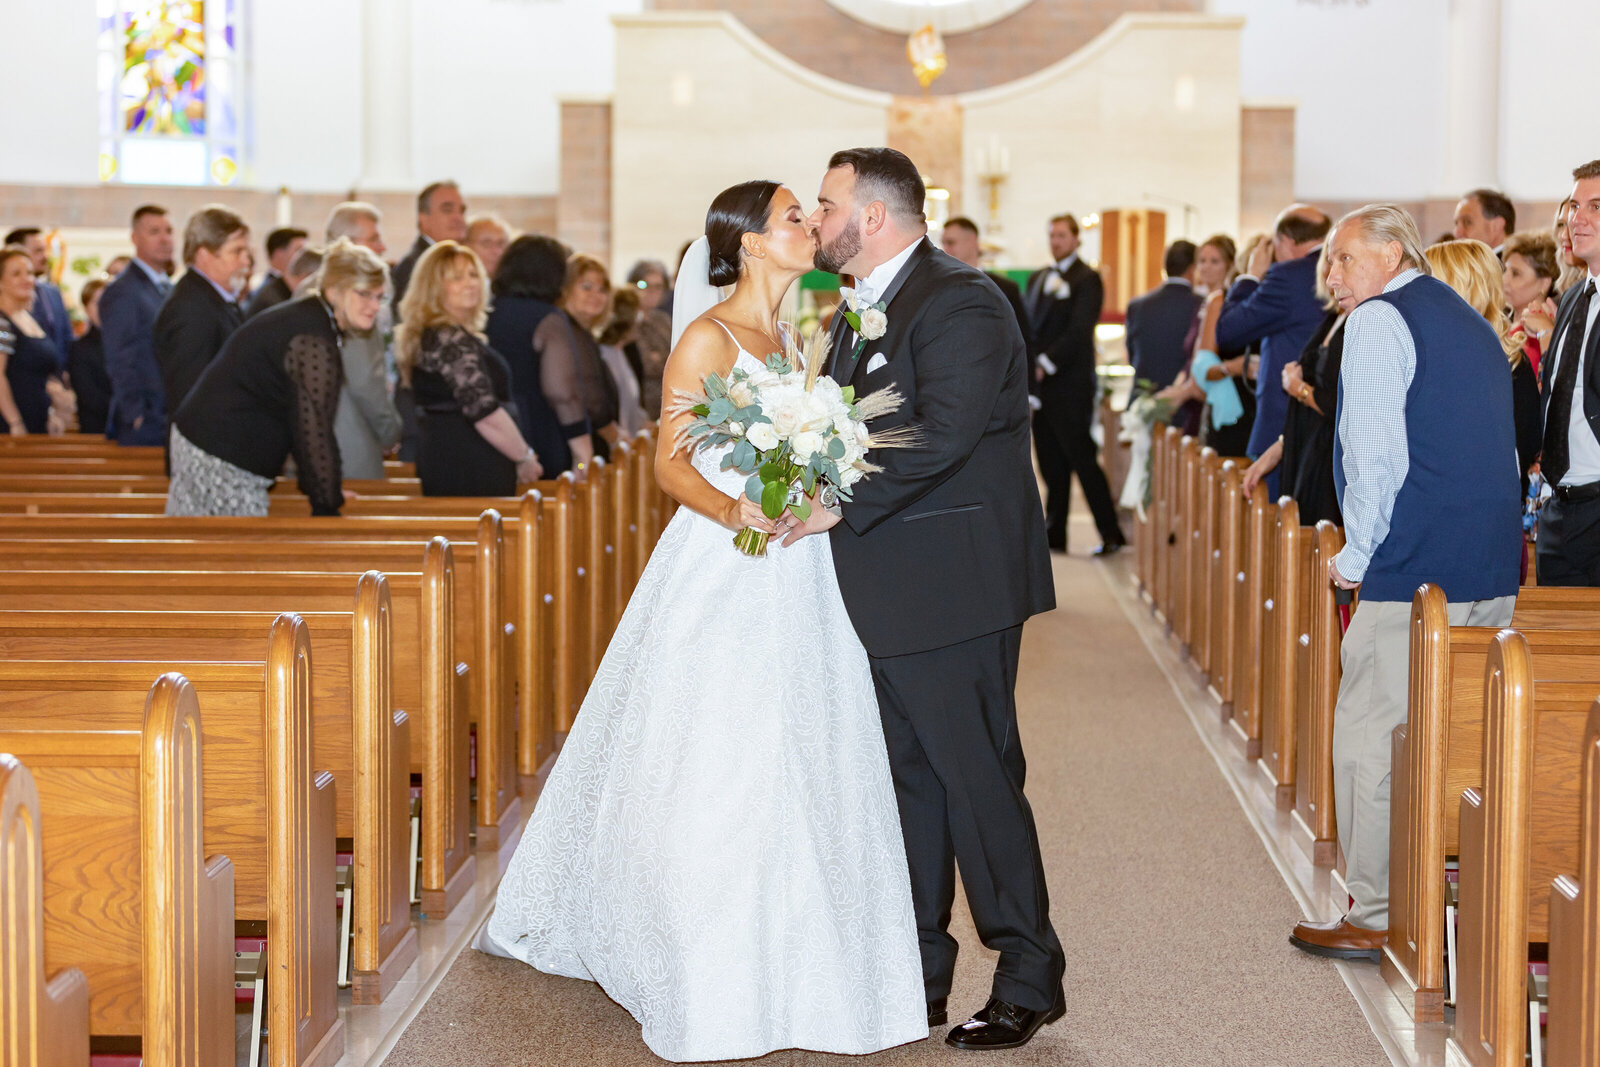 Timeless, authentic, natural and beautiful Wedding Photography in the Lehigh Valley